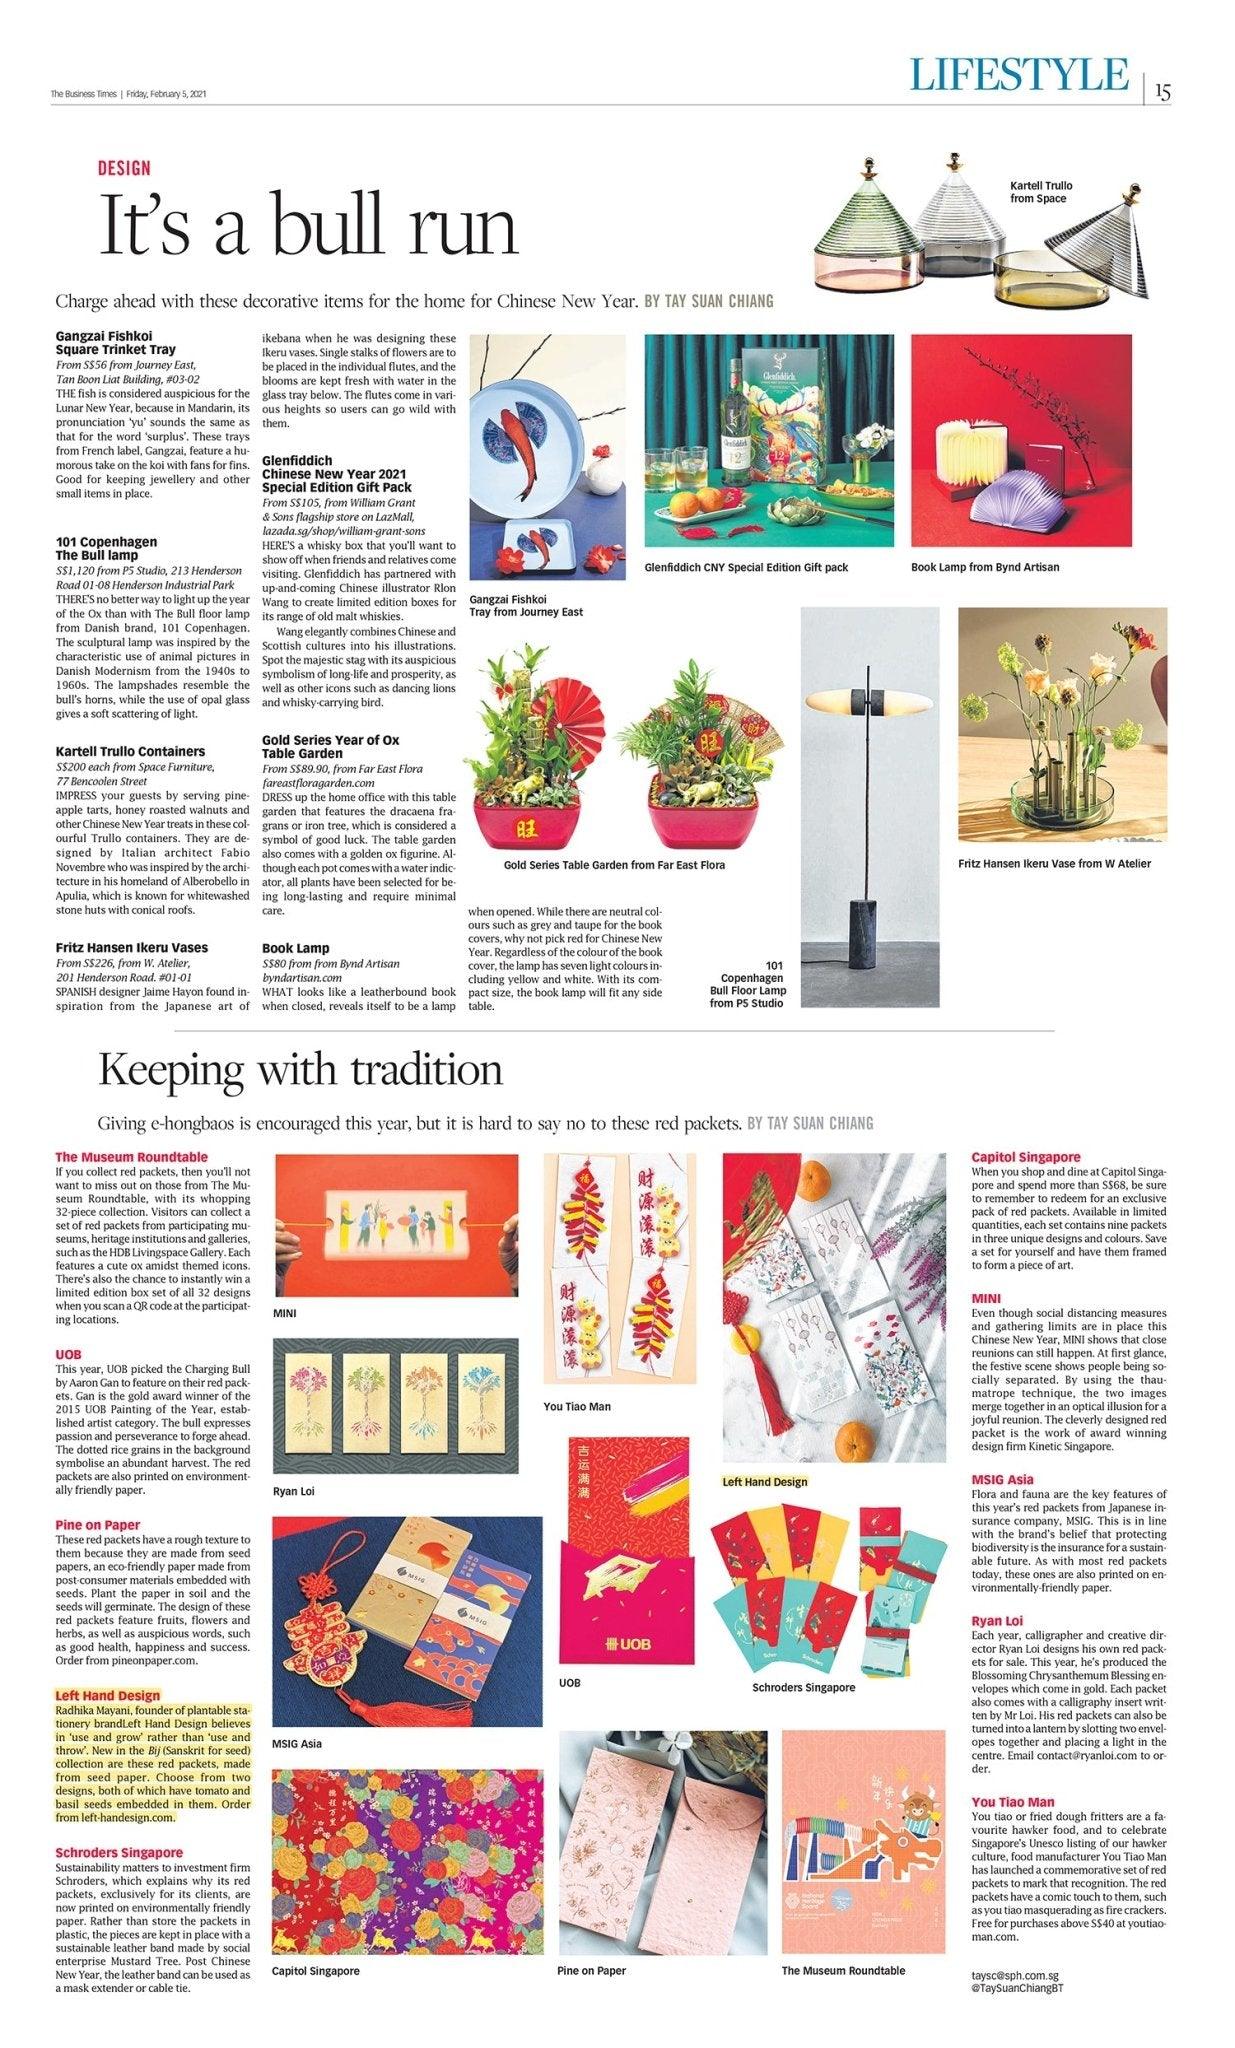 Featured in Business Times Singapore - left-handesign®